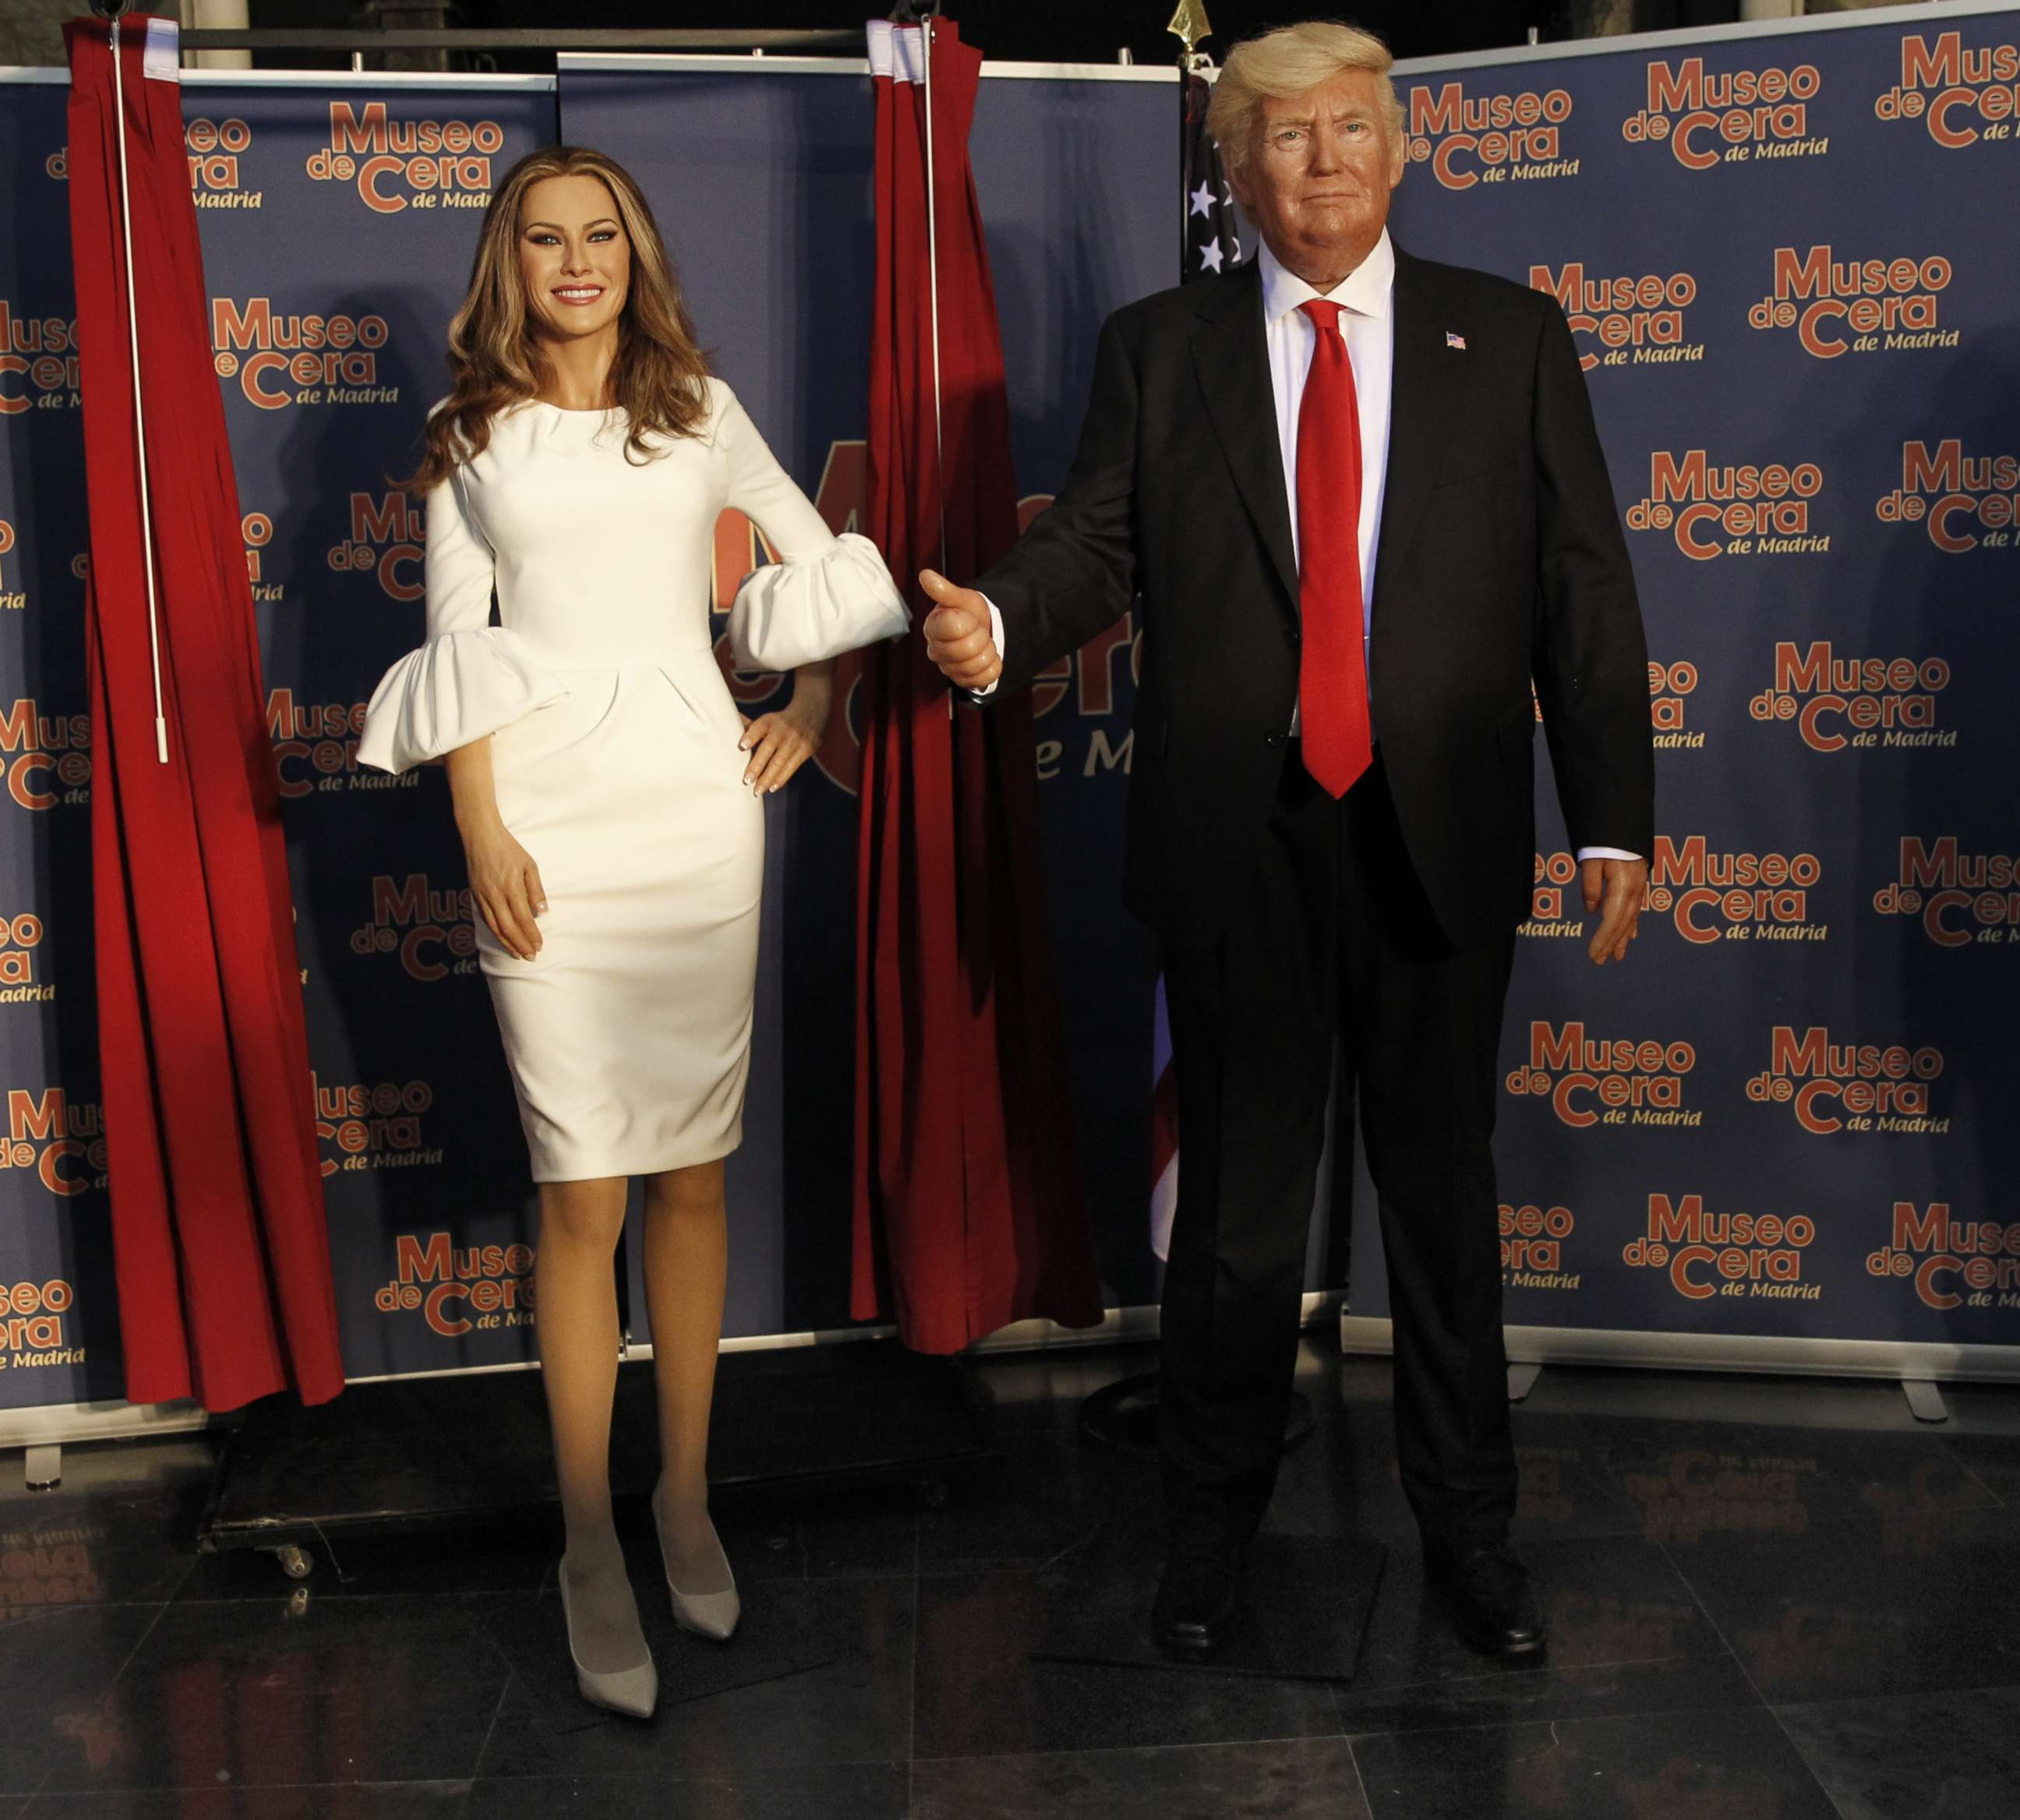 PHOTO: The wax figures of Melania Trump and Donald Trump are displayed at the Wax Museum on July 20, 2017 in Madrid, Spain.  